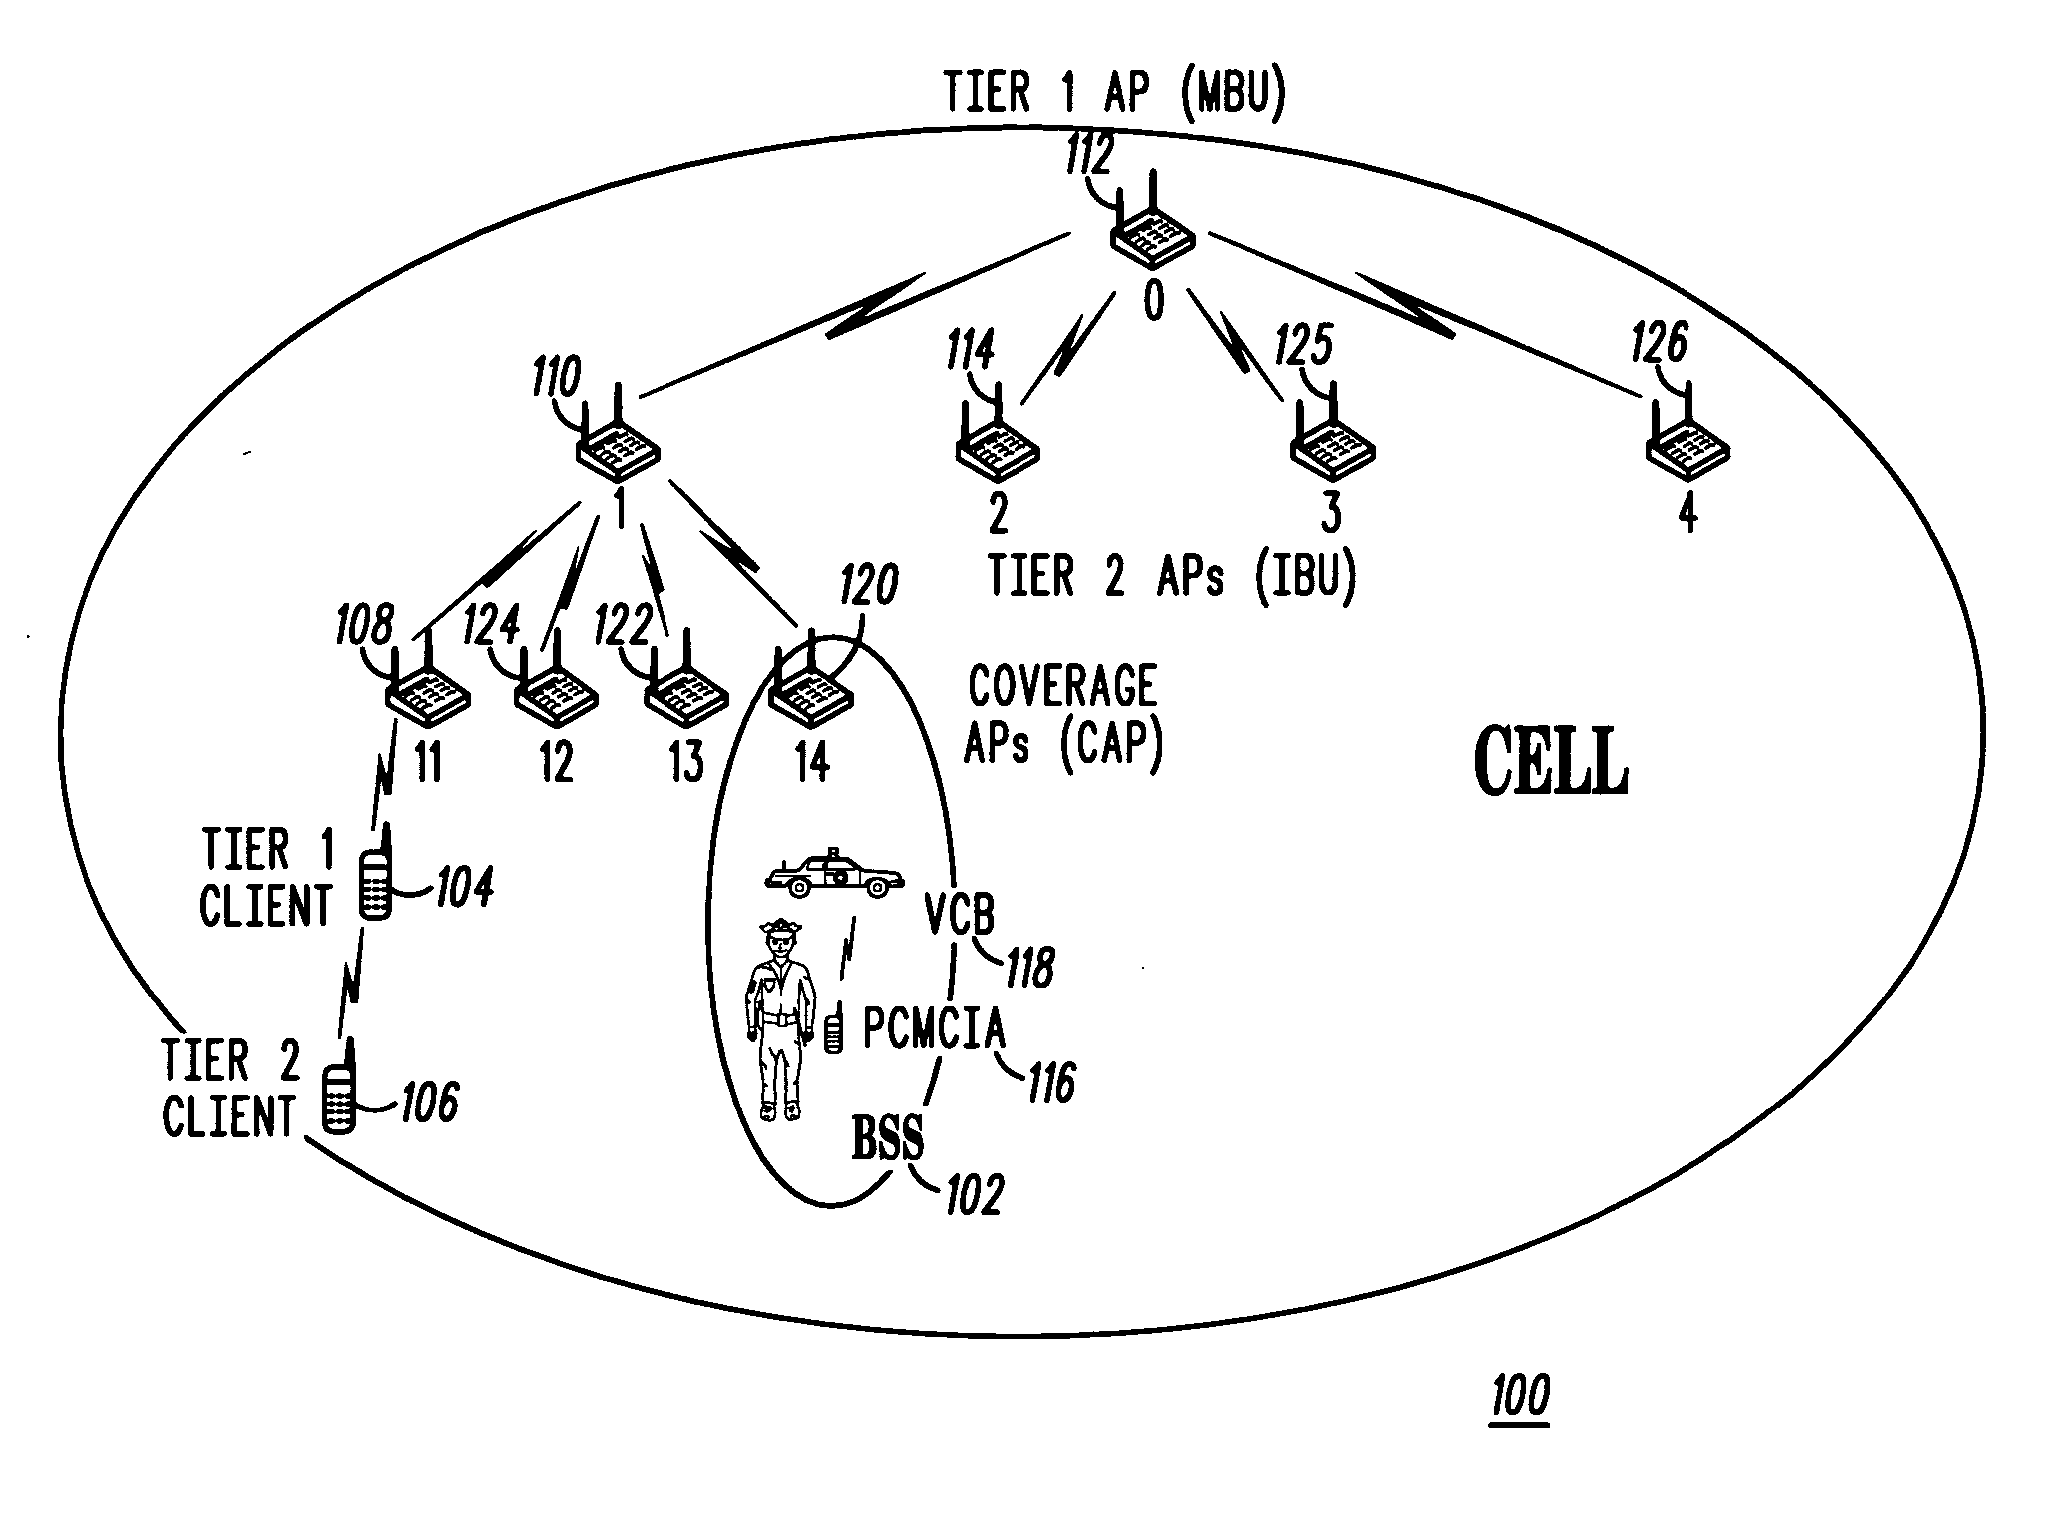 Method for performing neighbor discovery in a multi-tier WLAN